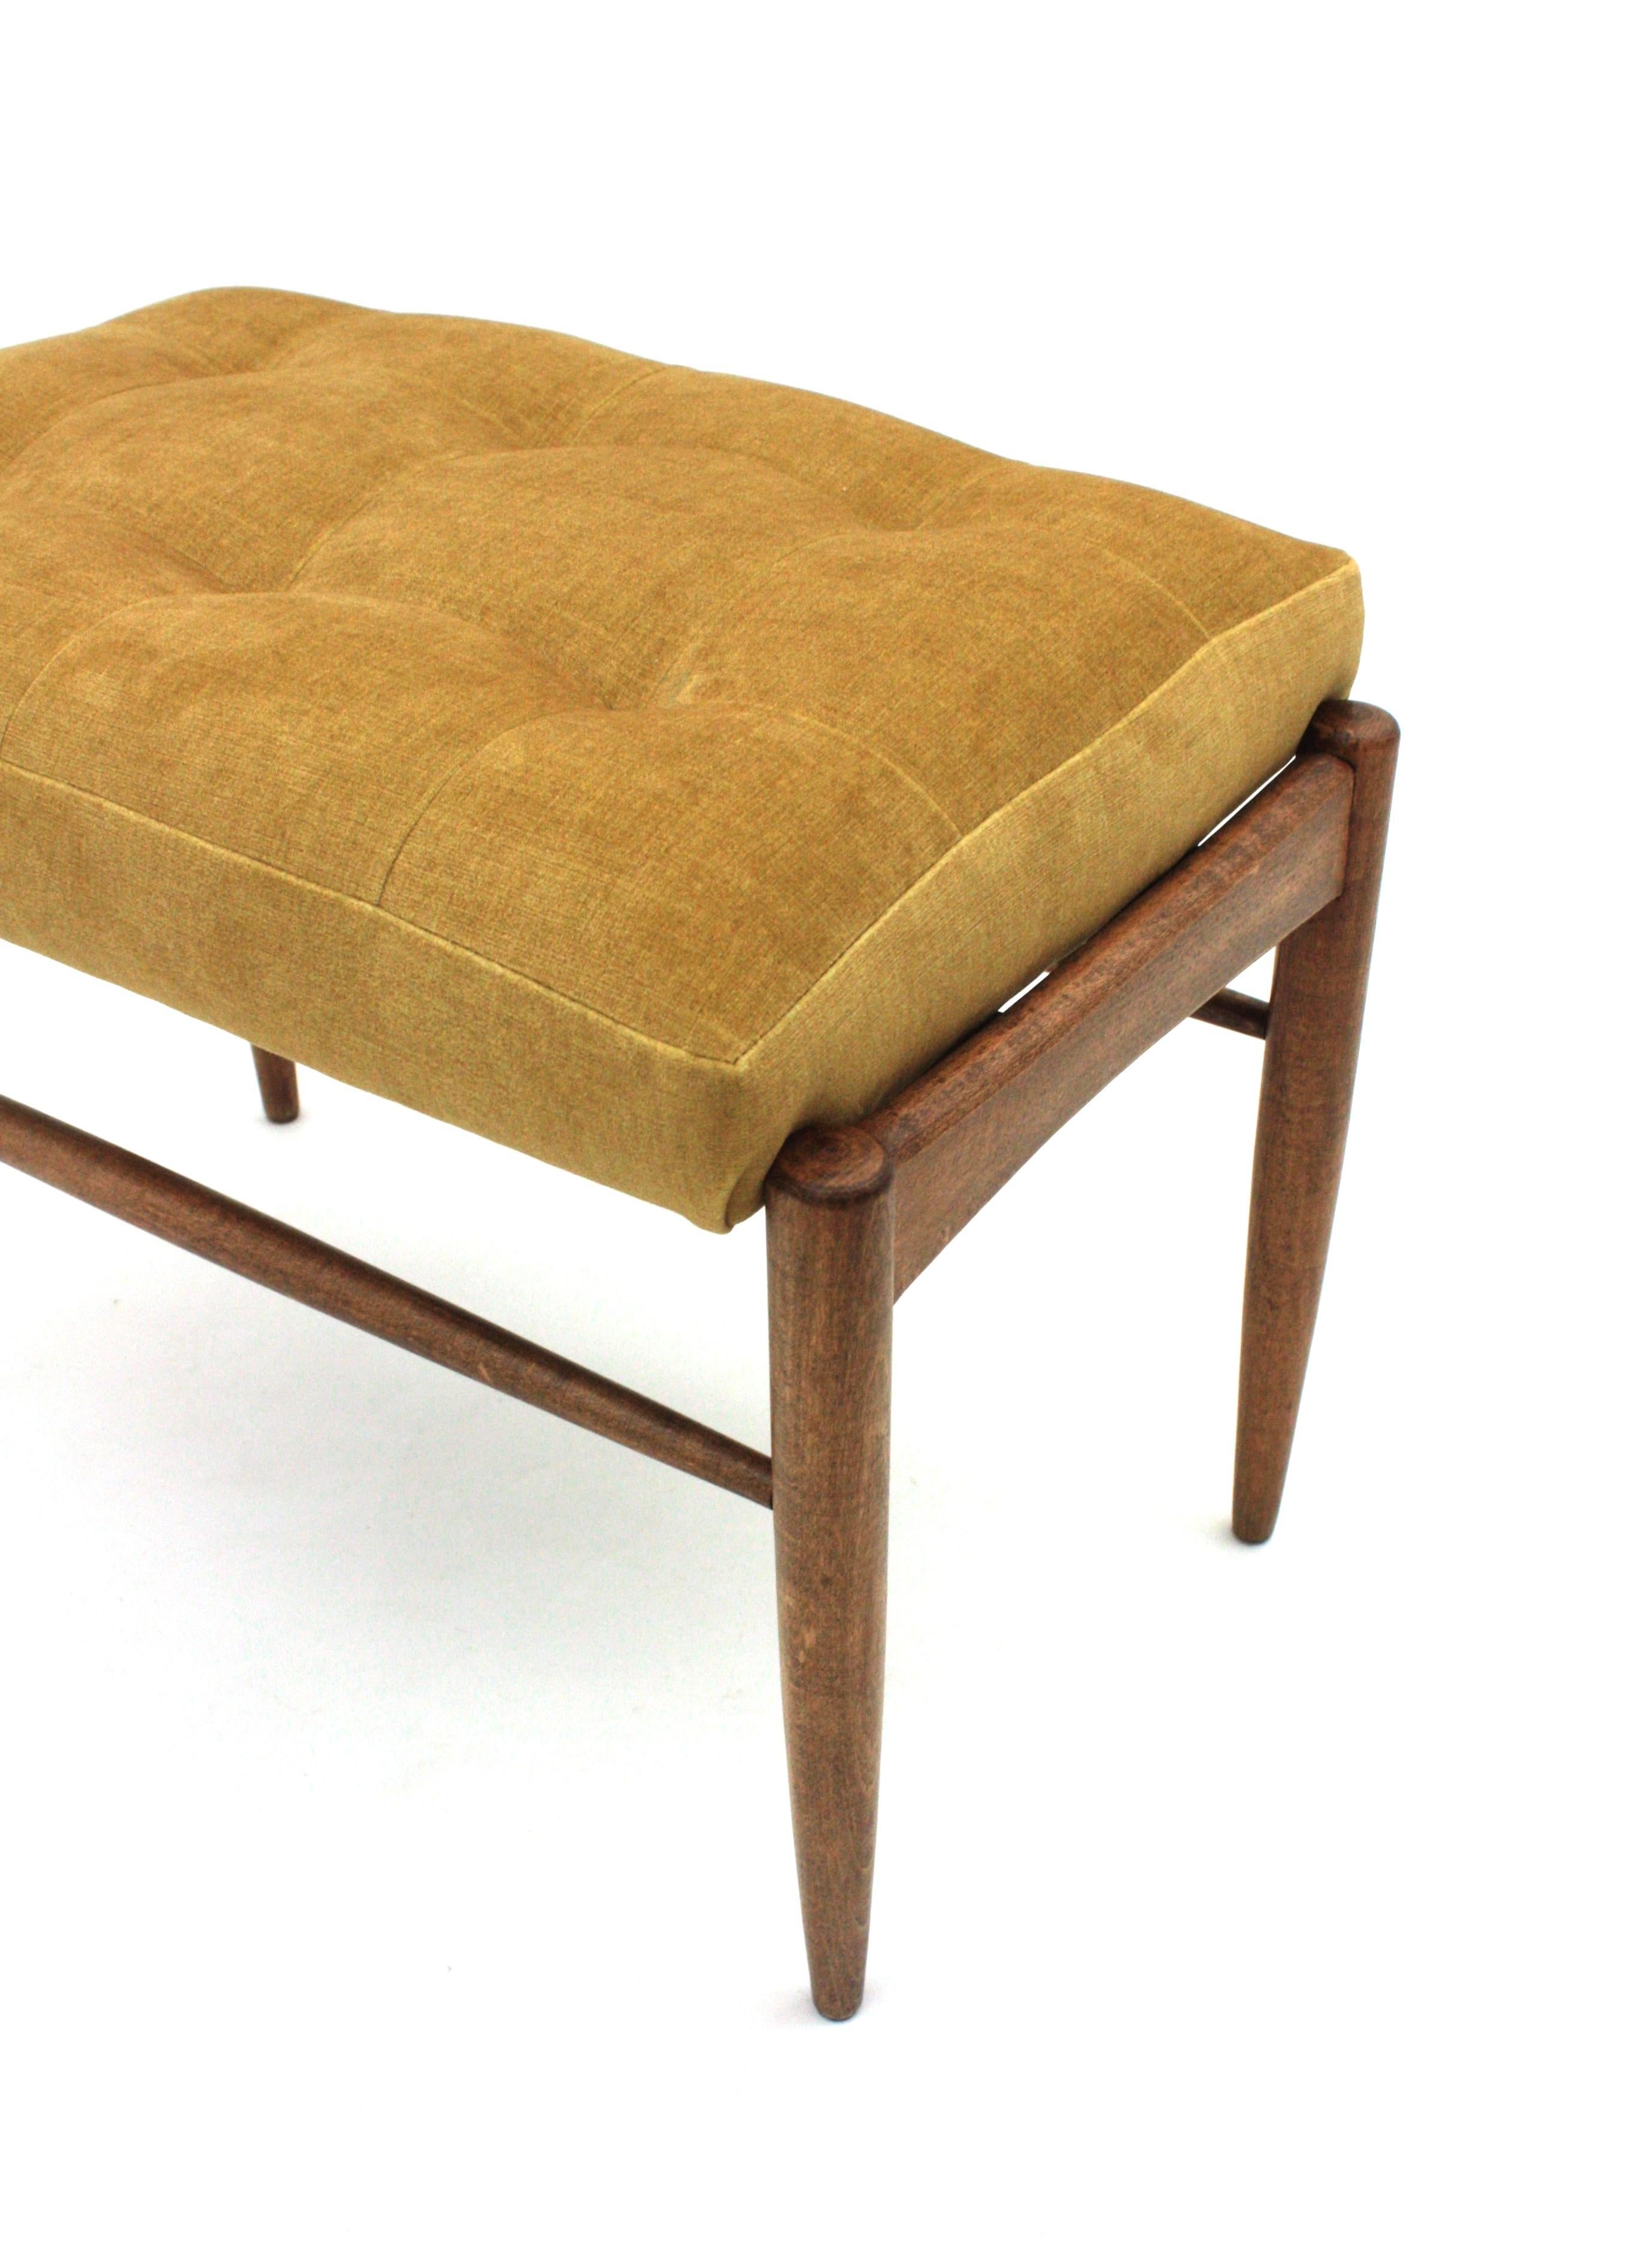 Scandinavian Modern Stool Ottoman or Bench New Upholstered in Yellow Chenille For Sale 6